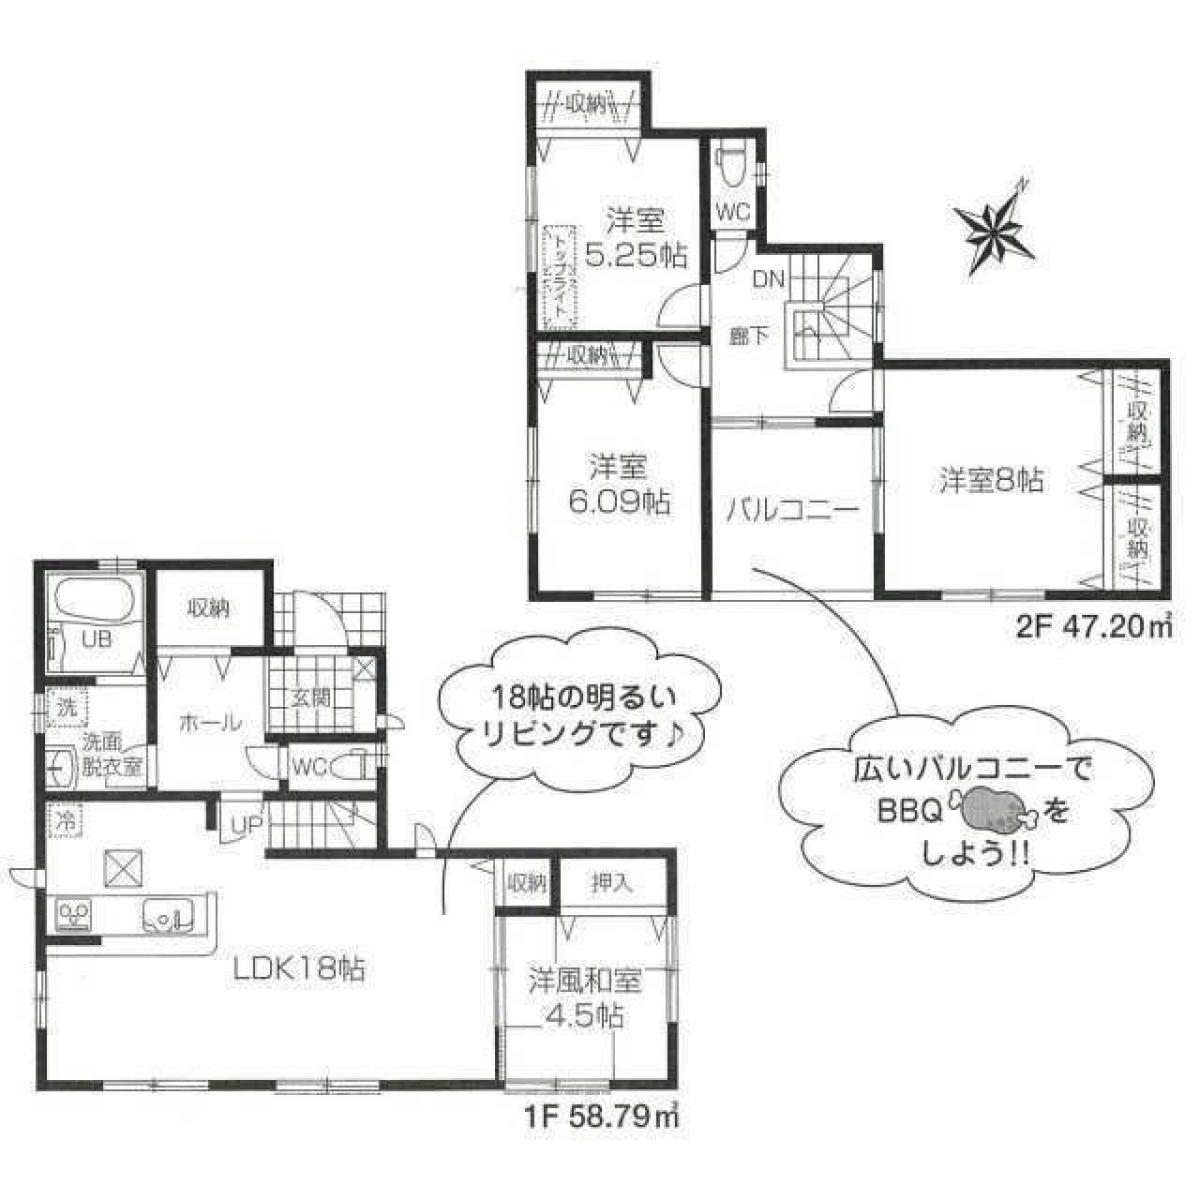 Picture of Home For Sale in Kiyose Shi, Tokyo, Japan